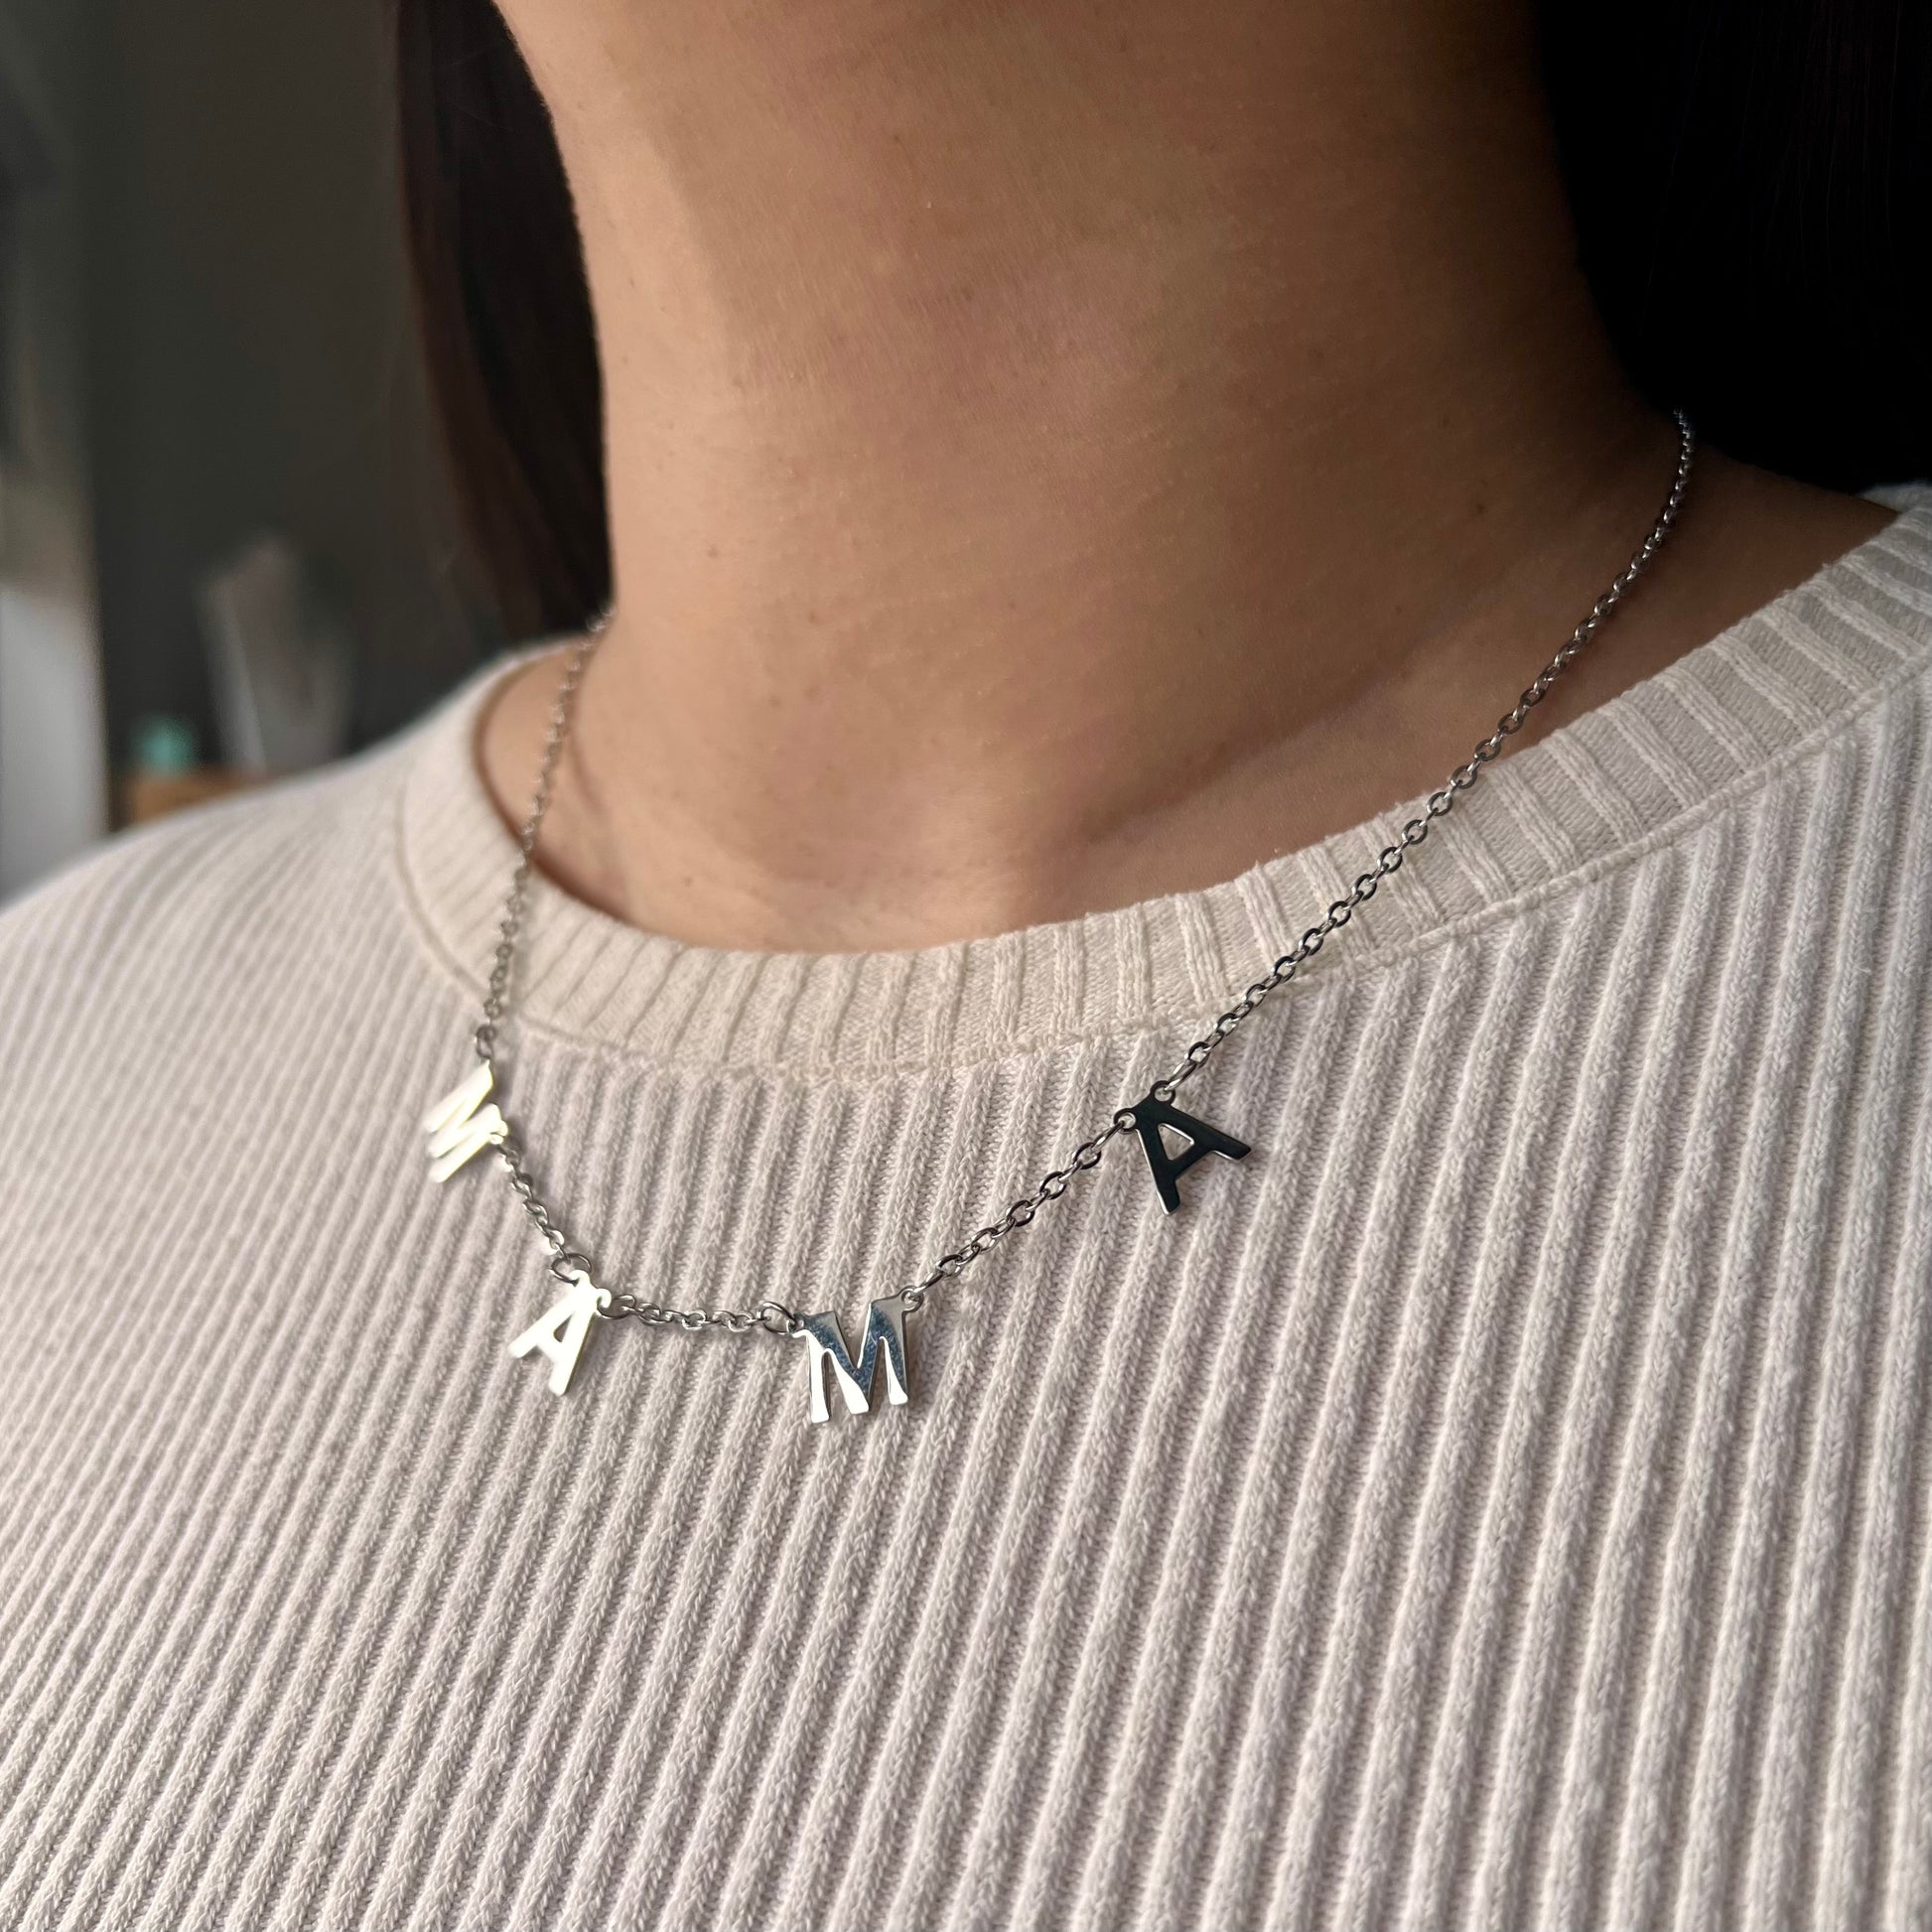 Get trendy with Mama Necklace -  available at Alma Ireland. Grab yours for €23.99 today!